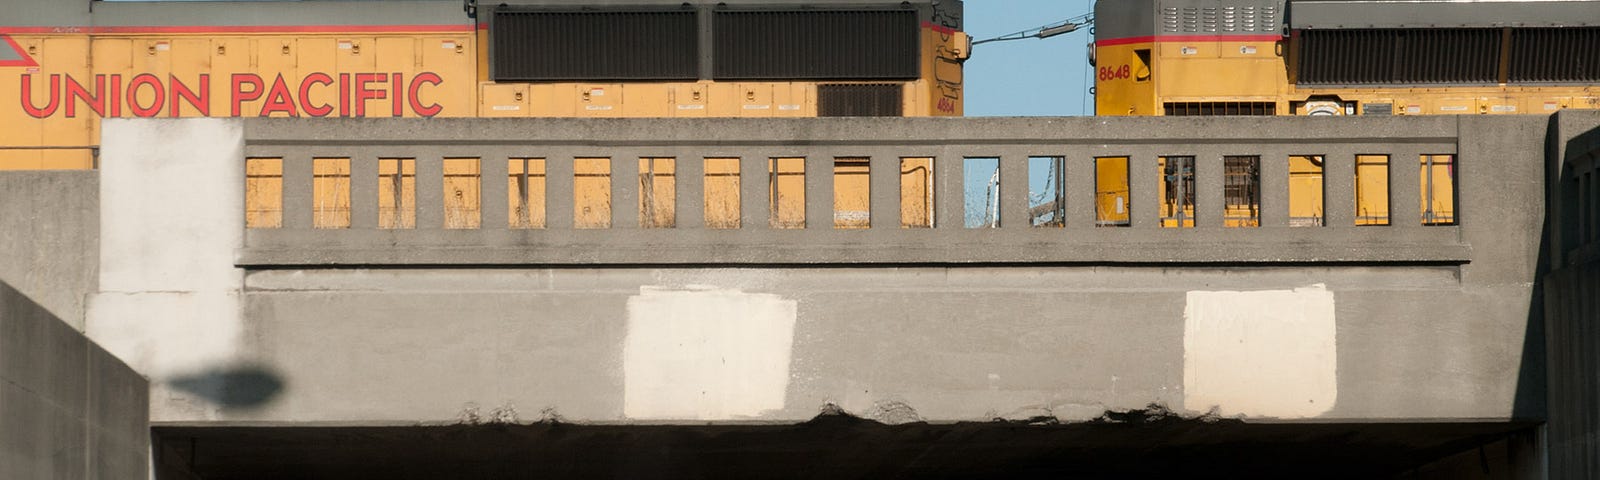 Two yellow partially-seen Union Pacific locomotives crossing an old beaten-up-looking grey concrete bridge.